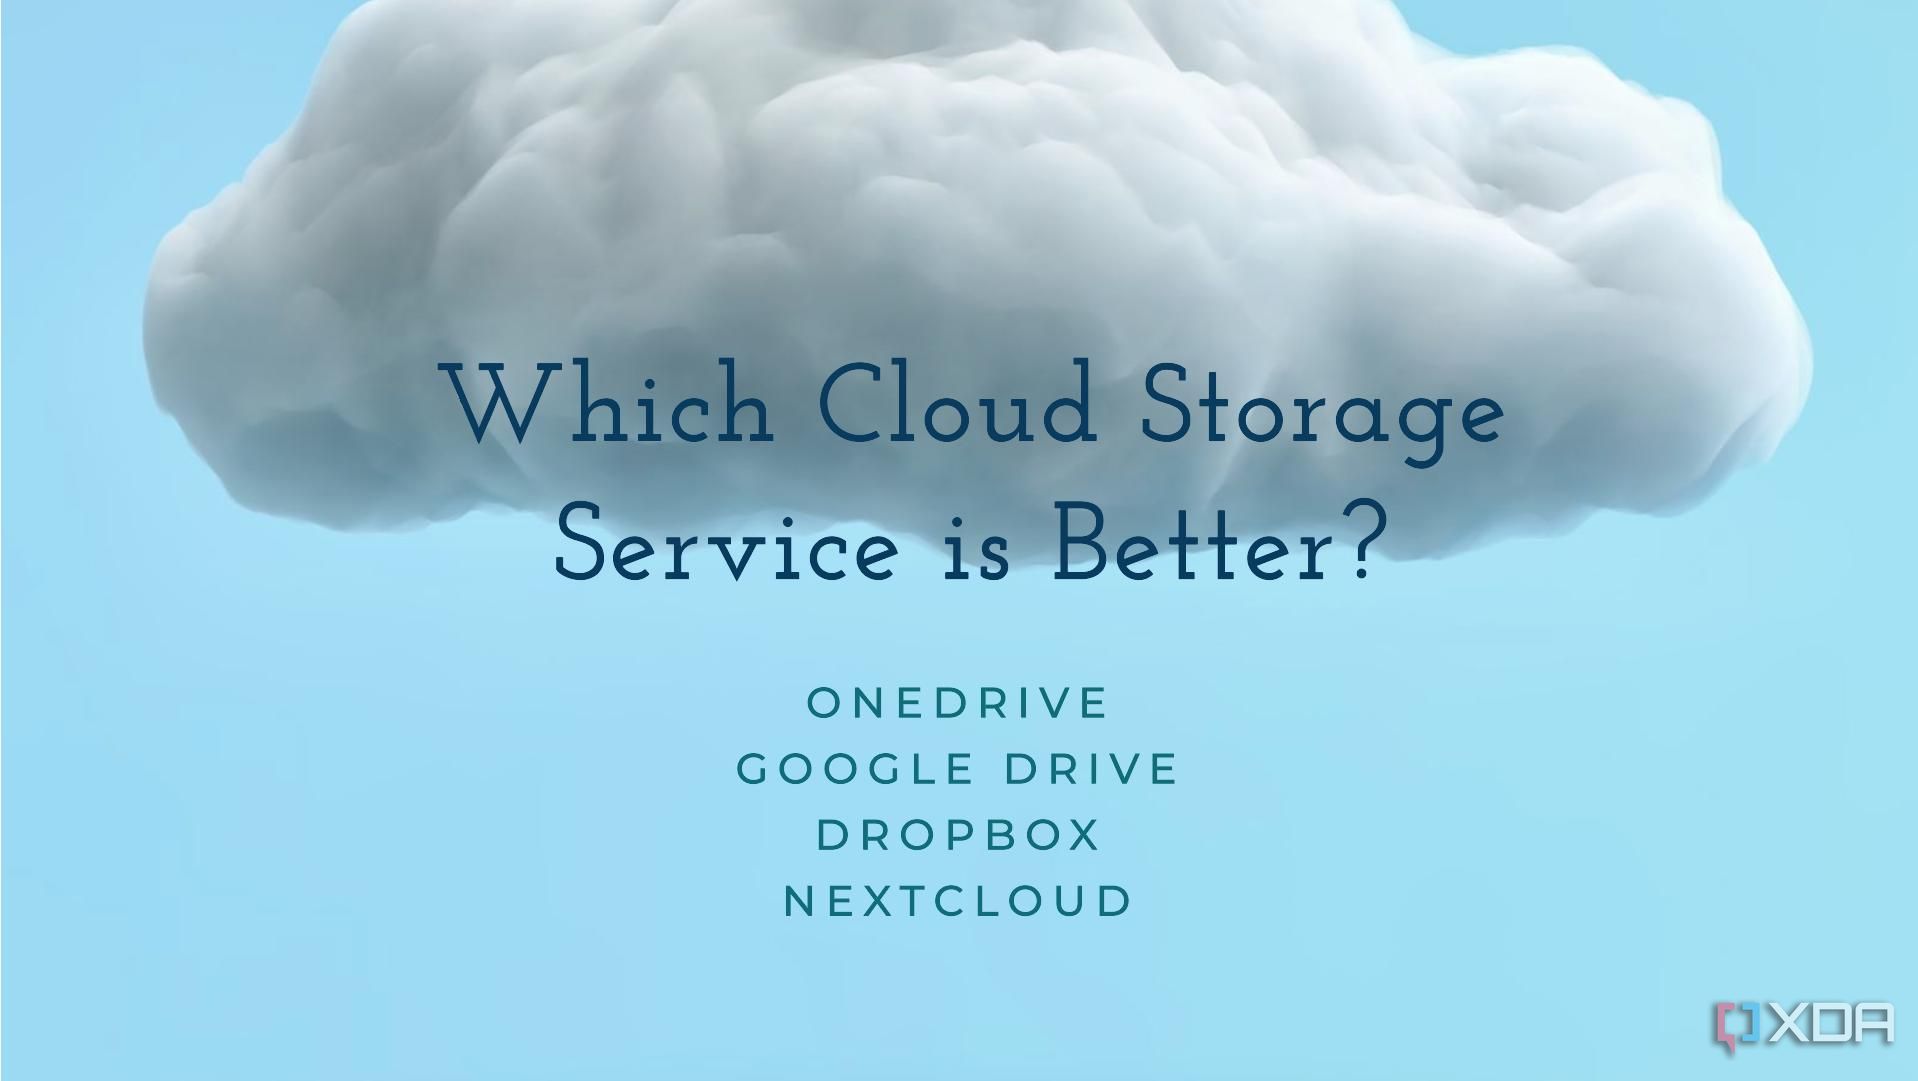 Which cloud storage service is better